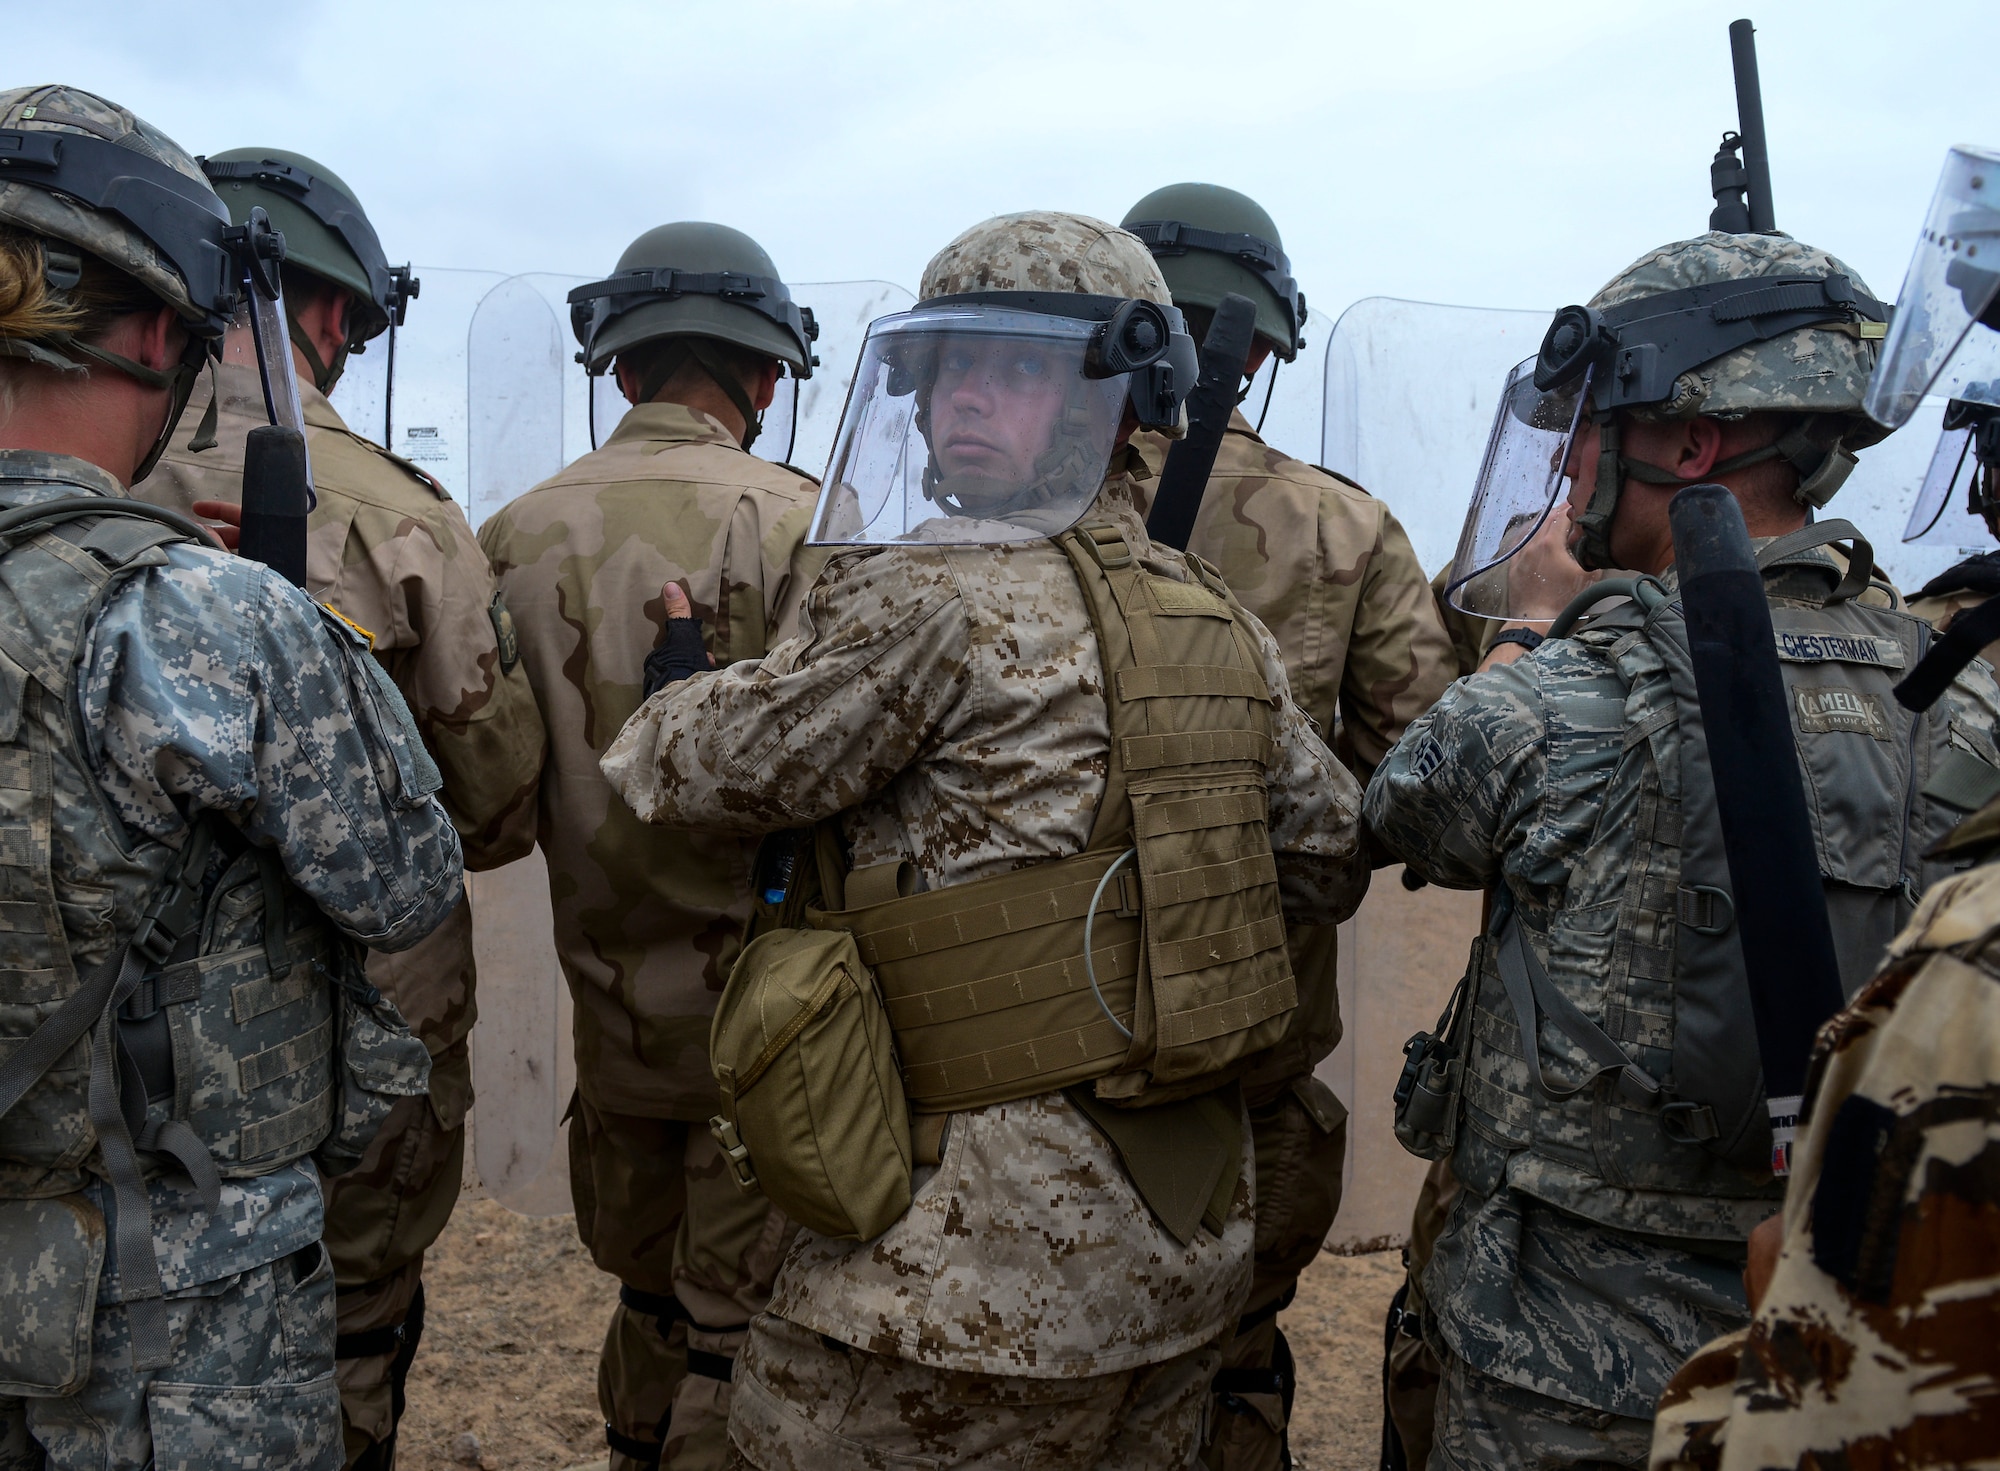 Military members from the U.S. Air Force, Marine Corps and Army; Royal Netherlands army and Royal Moroccan Armed Forces participate in a peace support operations demonstration during AFRICAN LION 16 at Tifnit, Kingdom of Morocco, April 26, 2016. The U.S. Marine Forces Europe-Africa and Kingdom of Morocco-led joint, combined exercise brought together 11 different countries to participate in a Combined Joint Task Force command post exercise and a peace support operations field training exercise to improve interoperability between countries. (U.S. Air Force photo by Senior Airman Krystal Ardrey/Released)